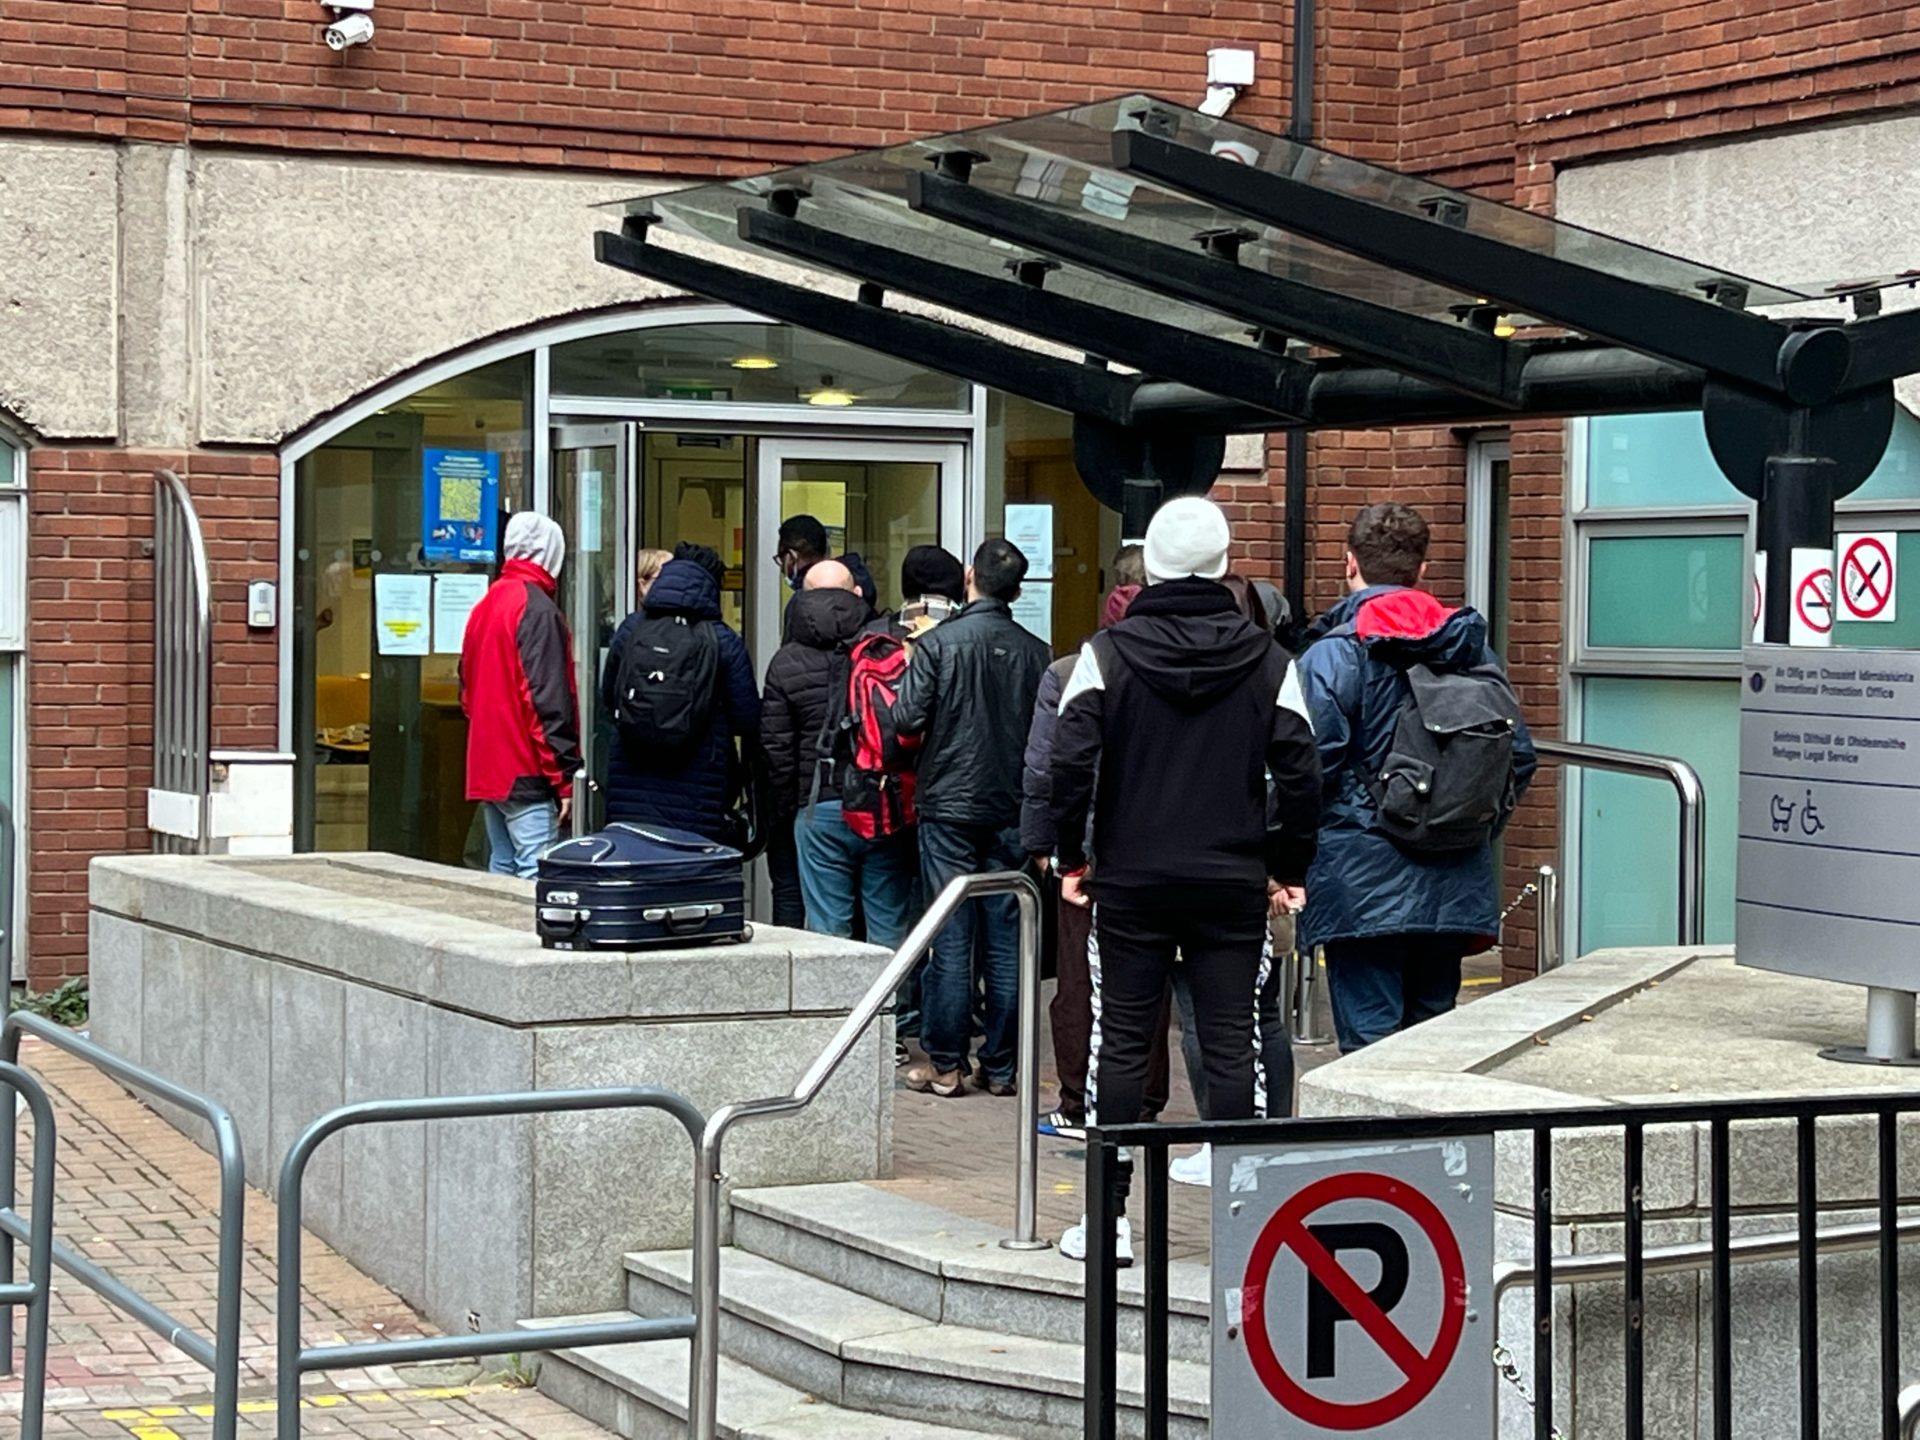 Main image shows asylum seekers queueing outside the Refugee Application Centre on Mount Street in Dublin.